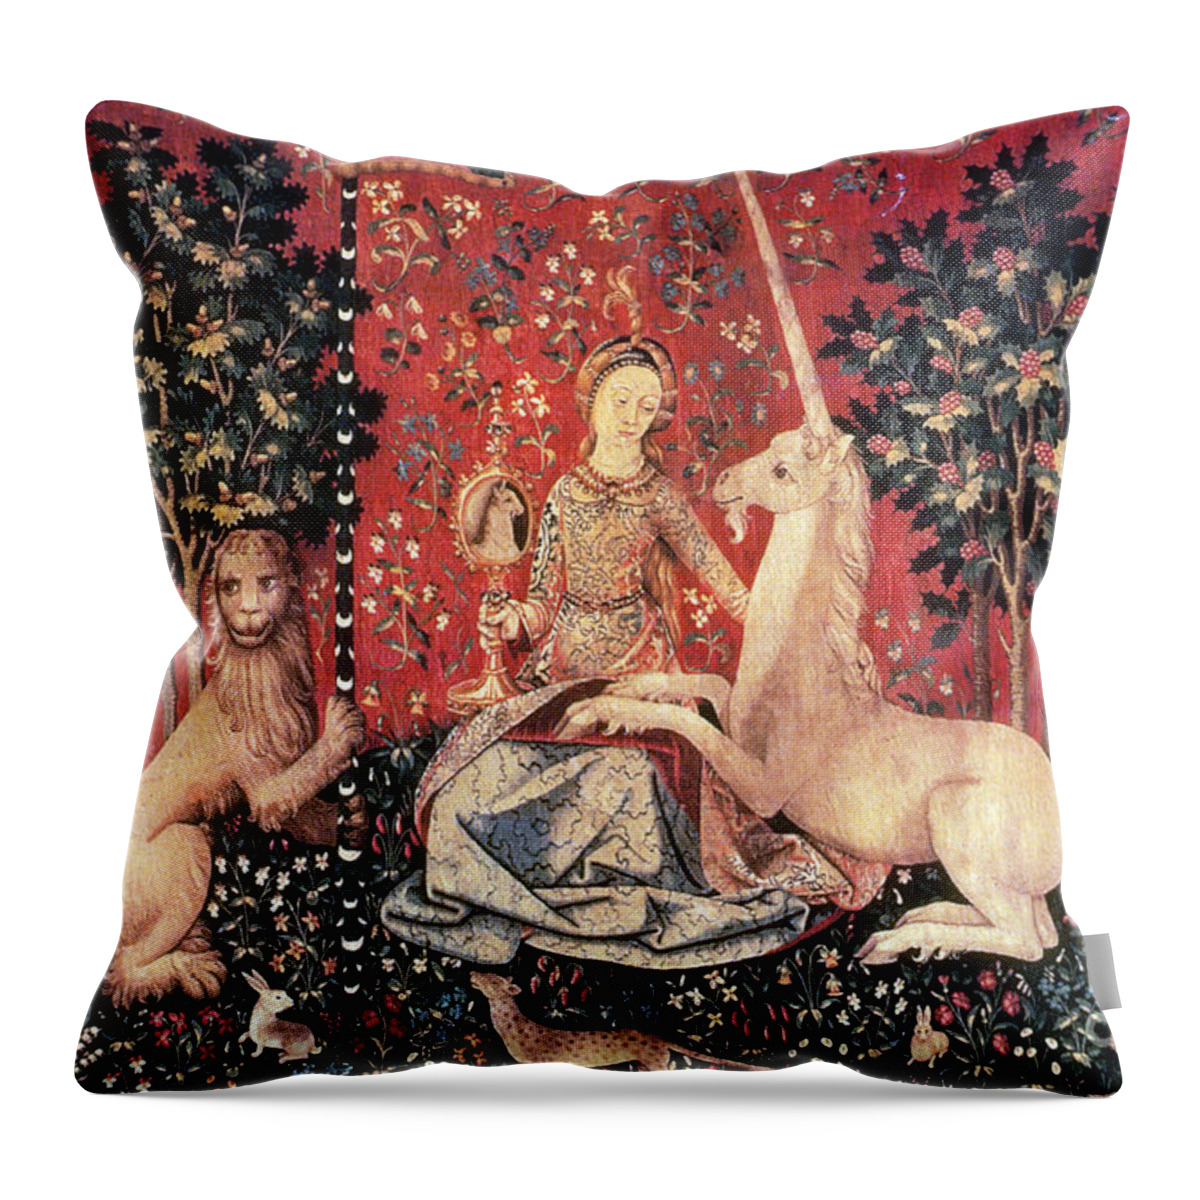 History Throw Pillow featuring the photograph The Lady And The Unicorn, 15th Century by Photo Researchers